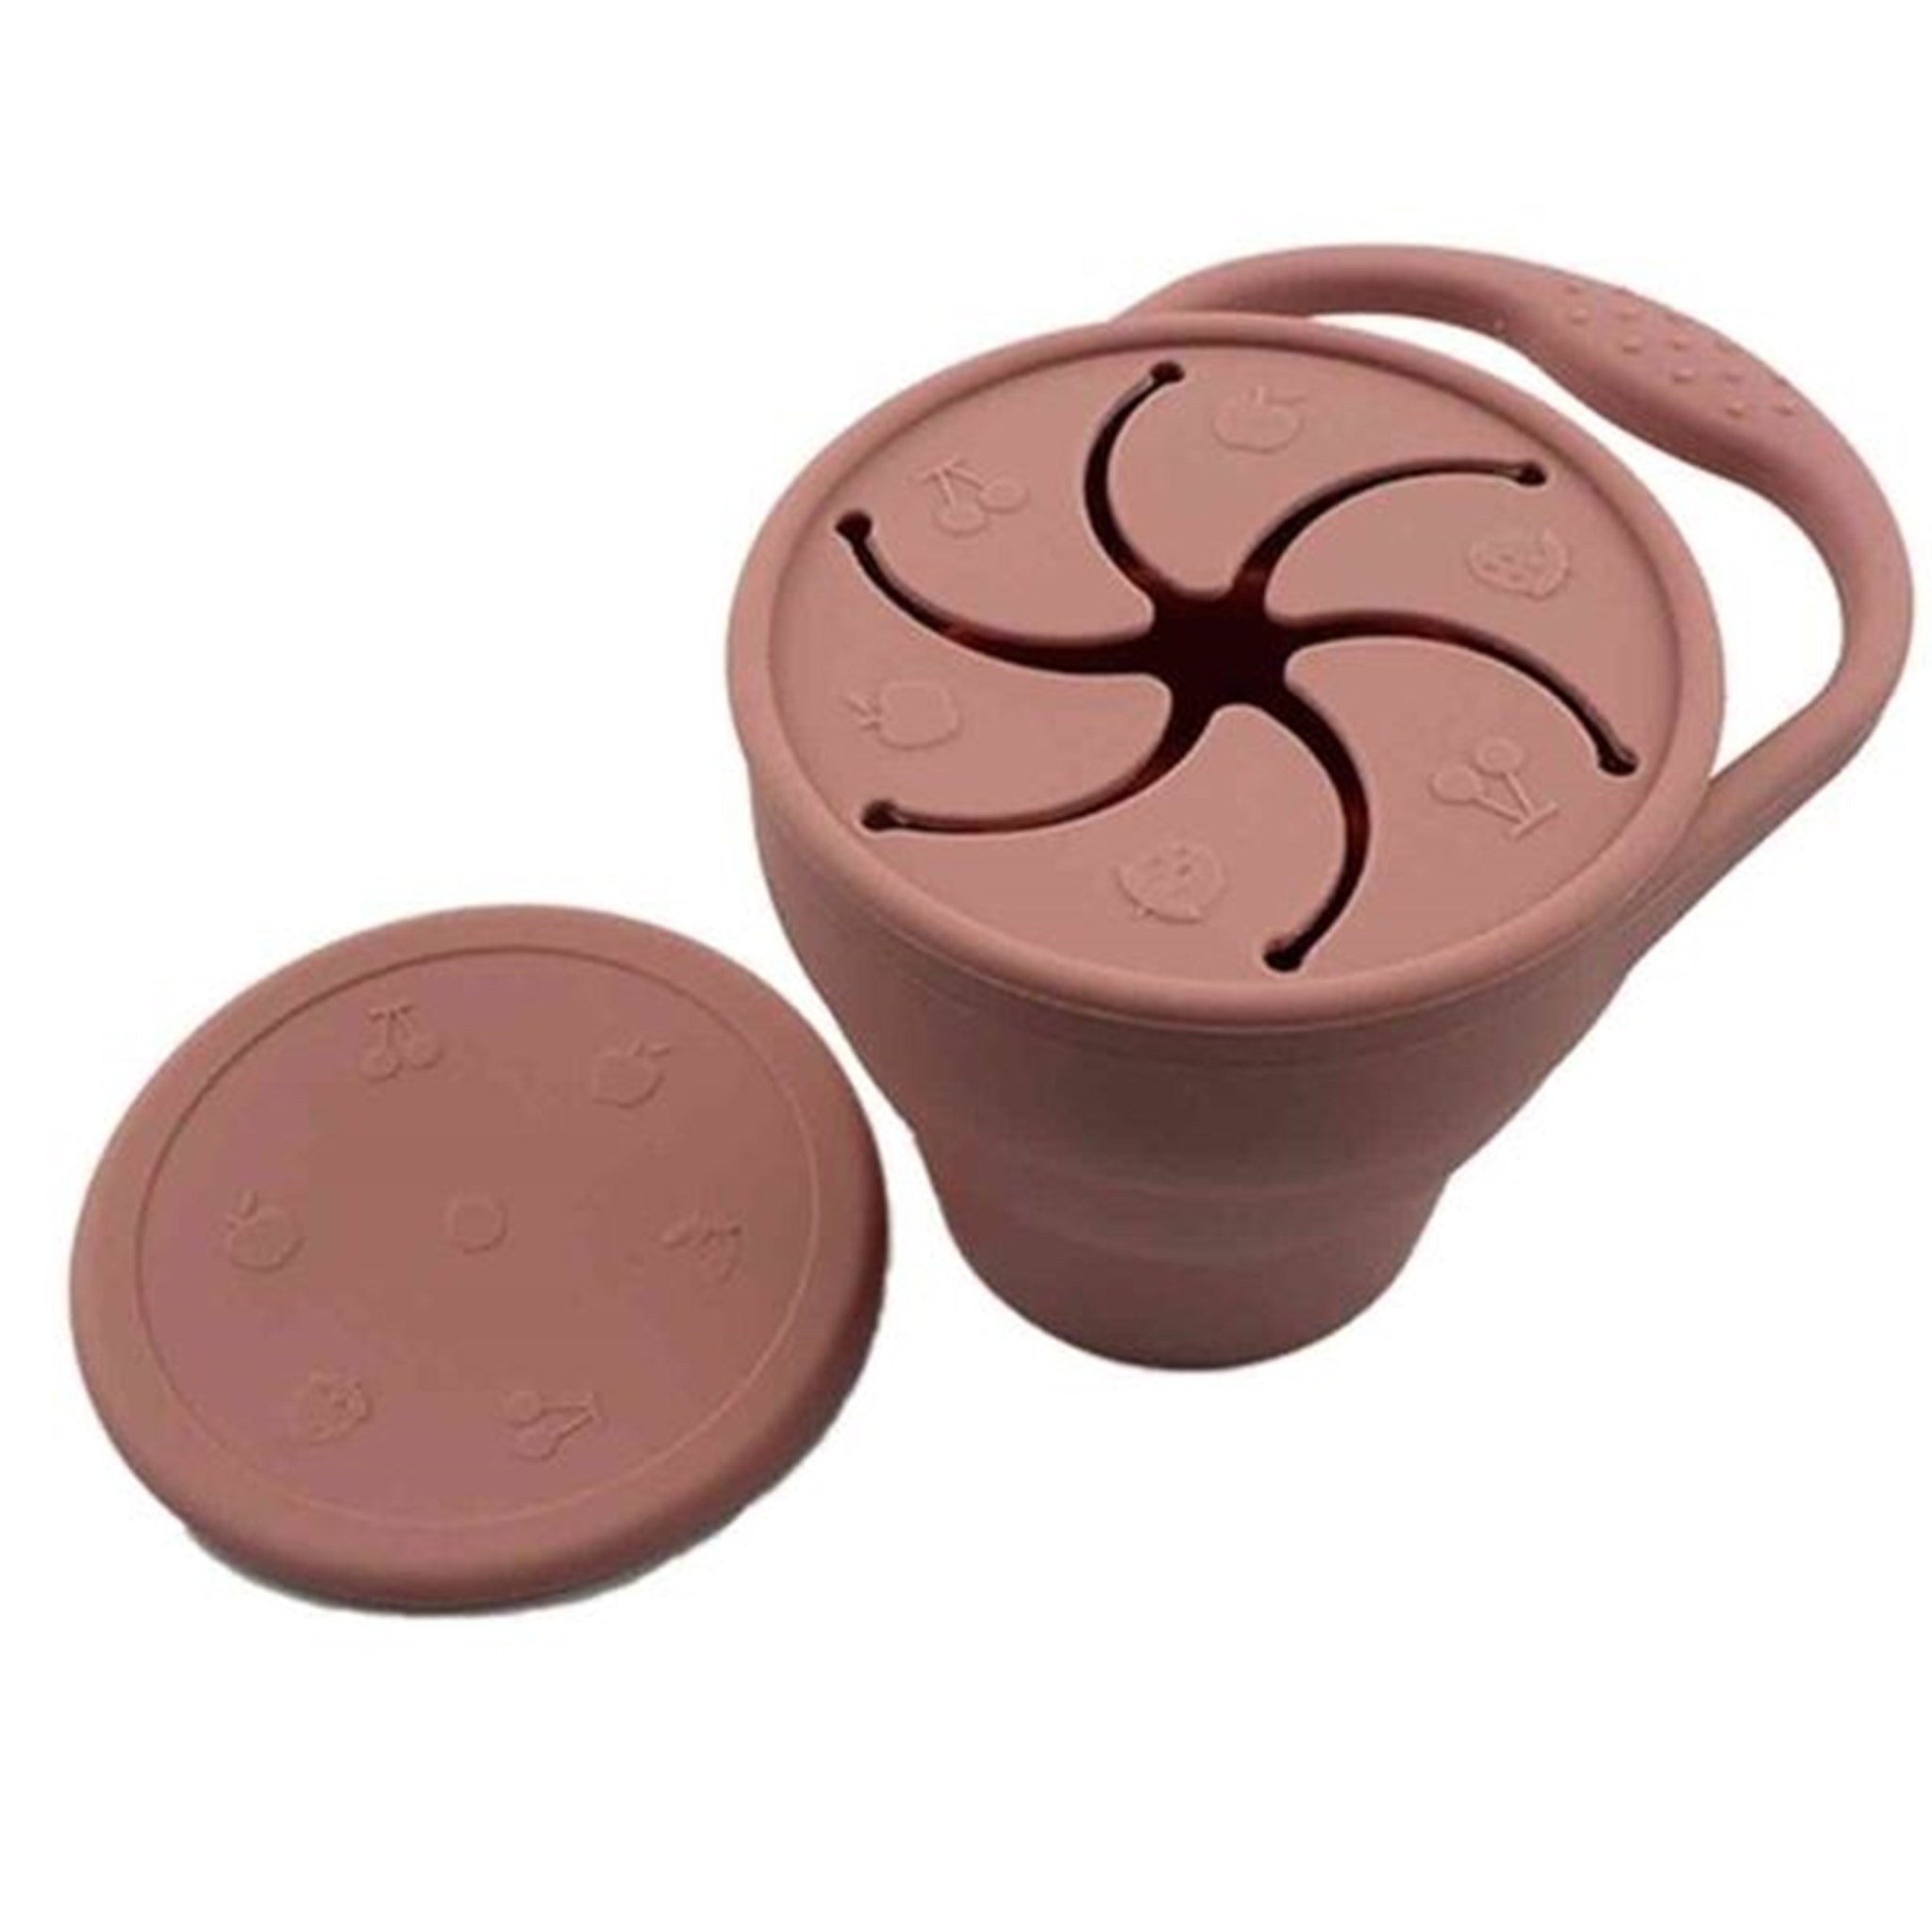 Tiny Tot Snack Cup Dusty Rose